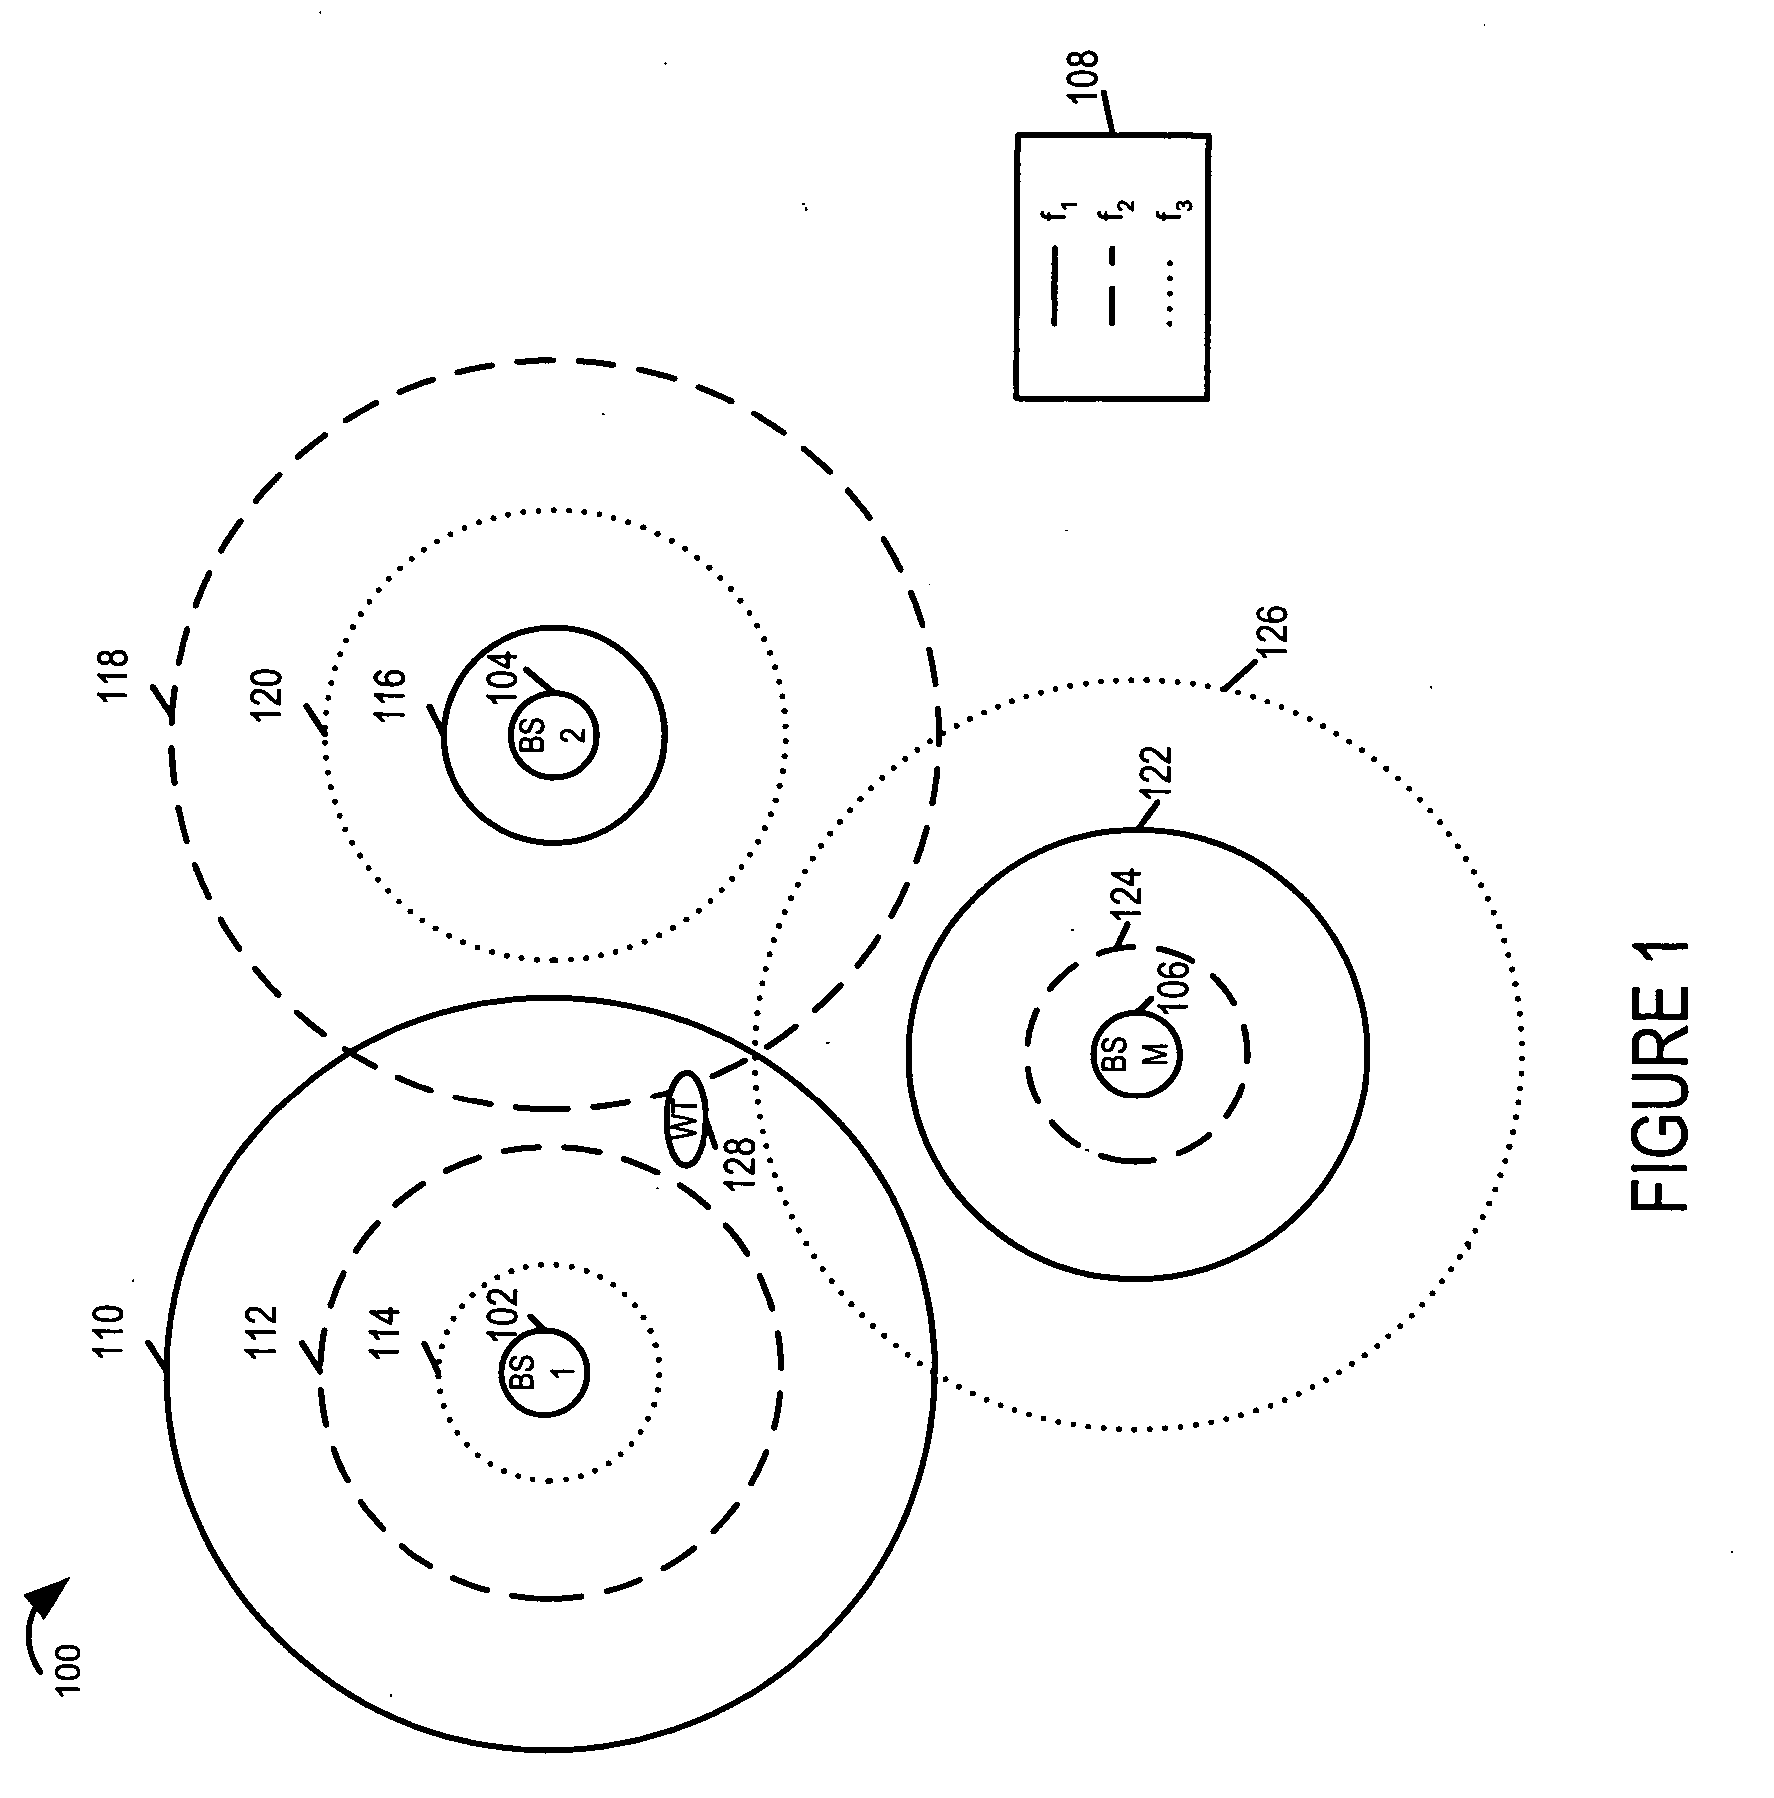 Wireless terminal location using apparatus and methods employing carrier diversity